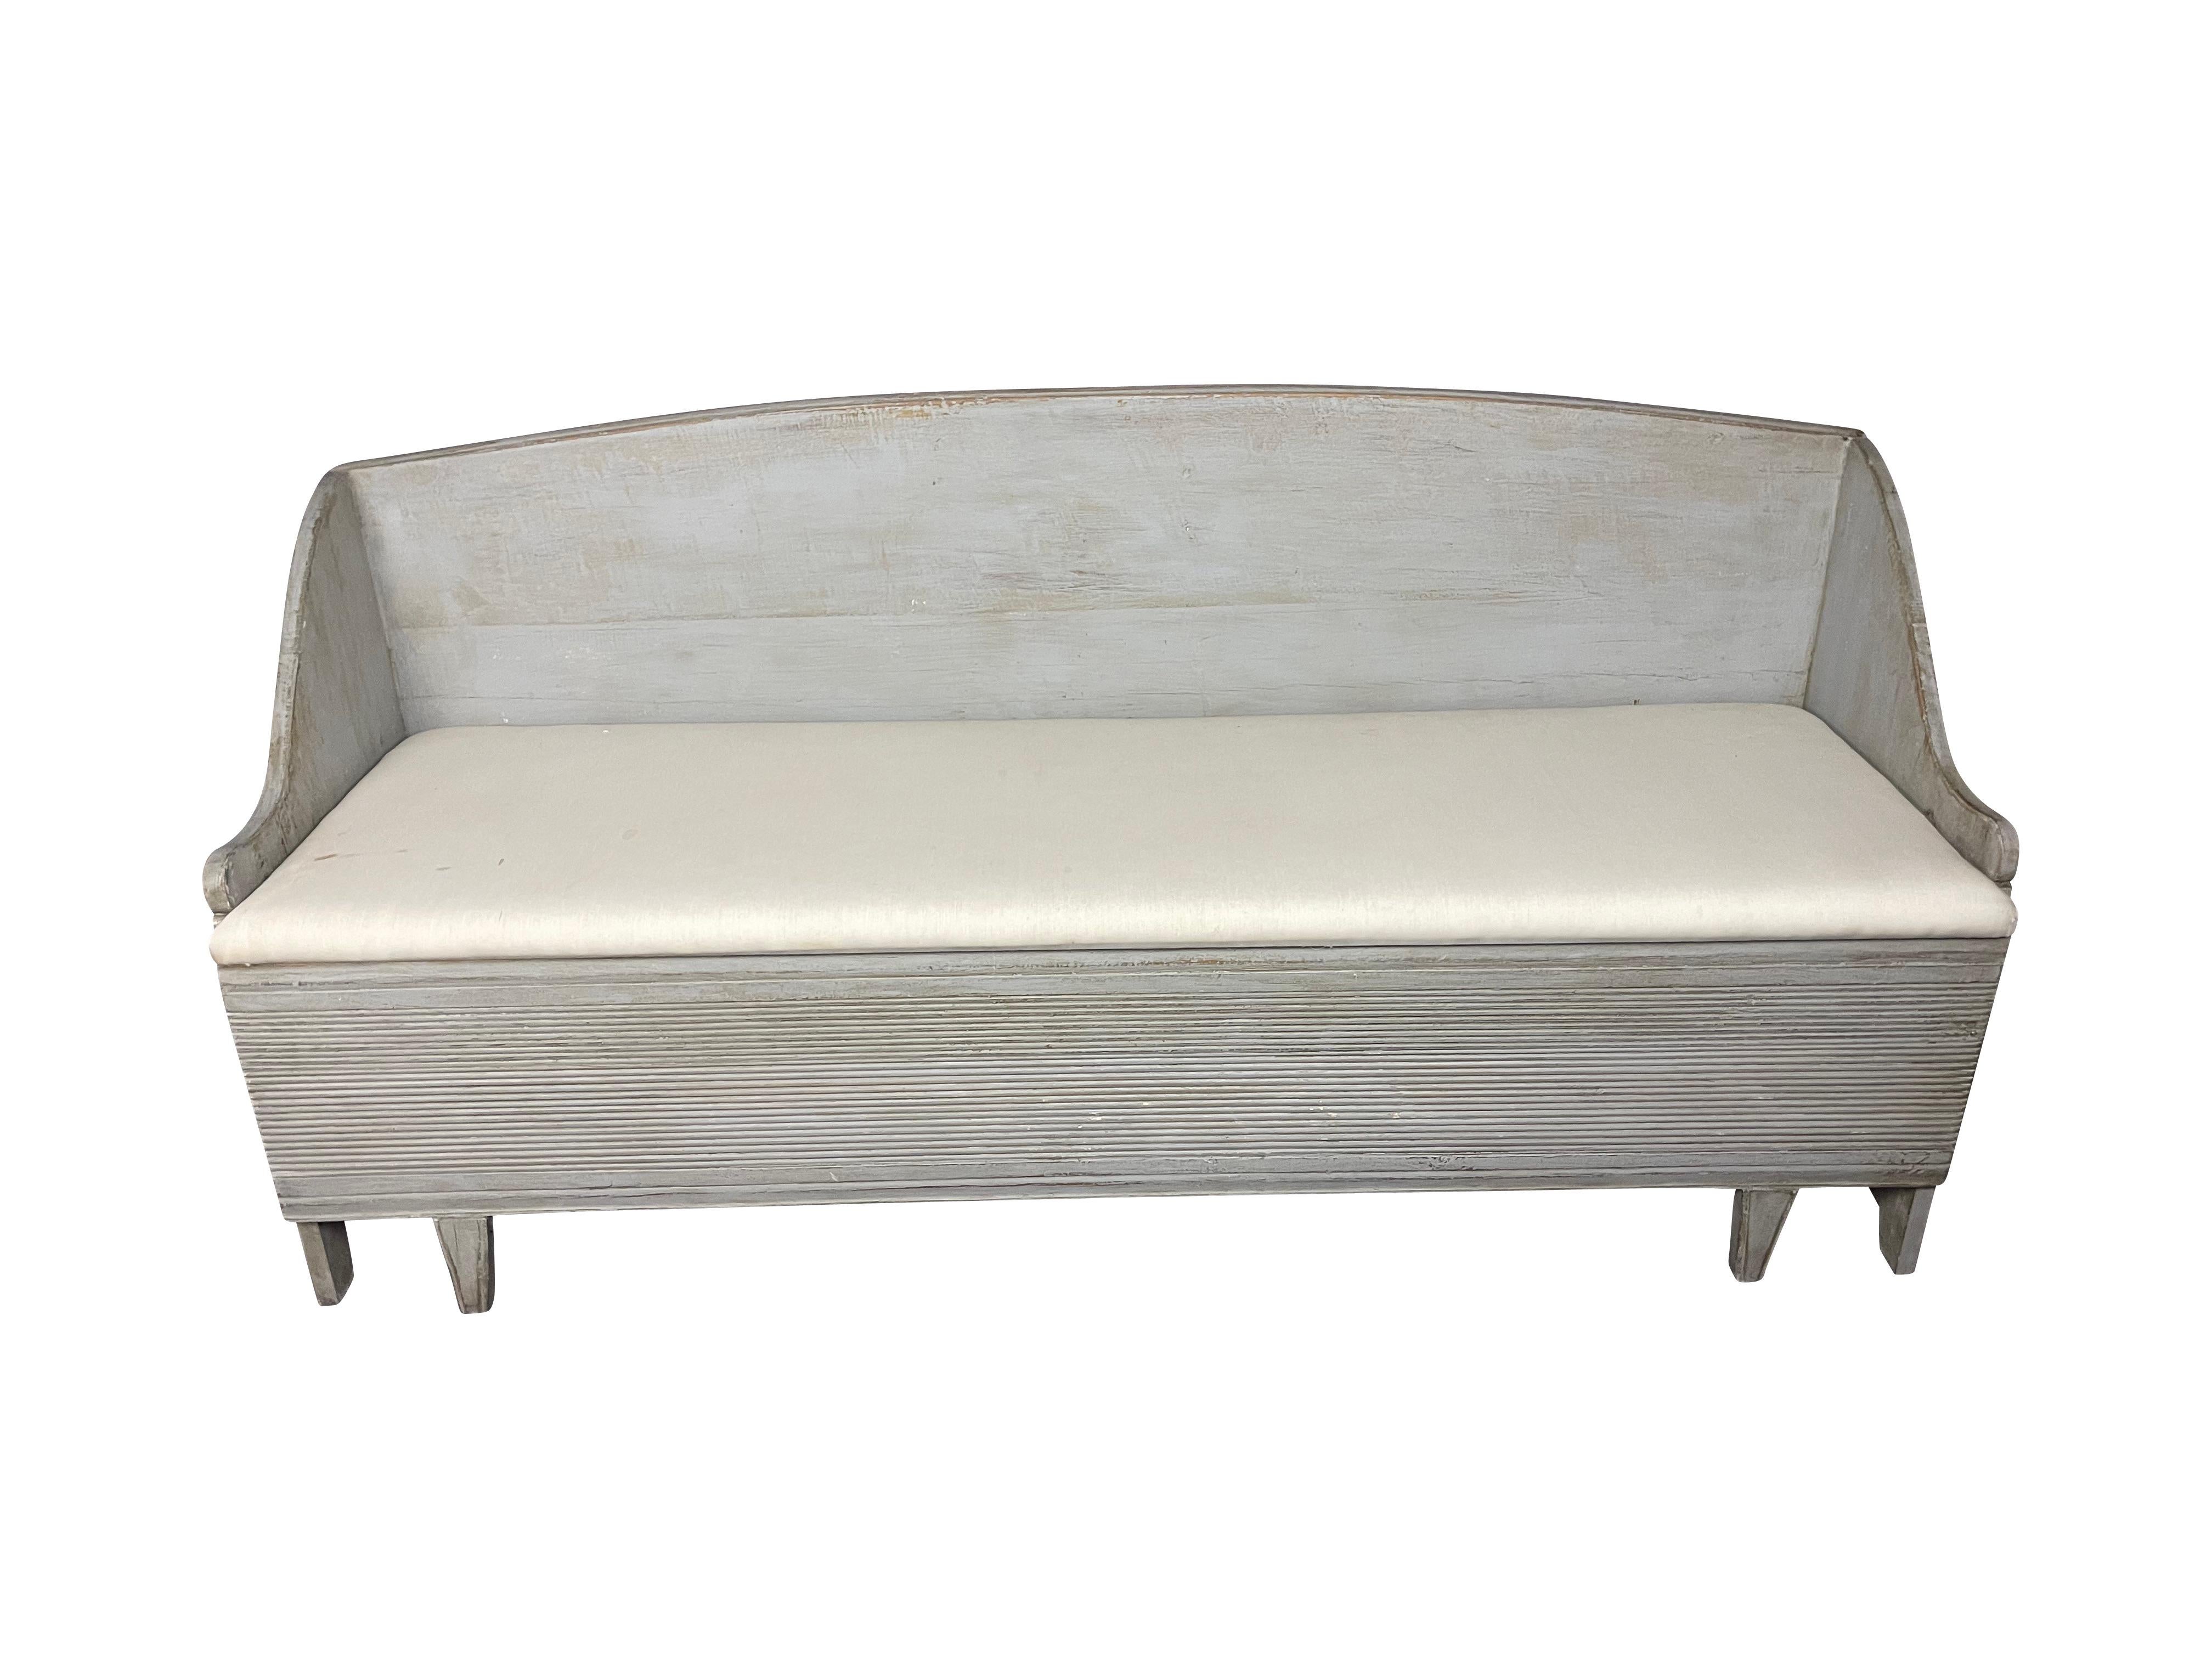 A charming grey-painted Swedish Gustavian hall bench or sofa would make a lovely kitchen settee or hall / mudroom bench and provide excellent storage. Simple, clean lines with a round back, classic reeded front, and a muslin cushion that can be